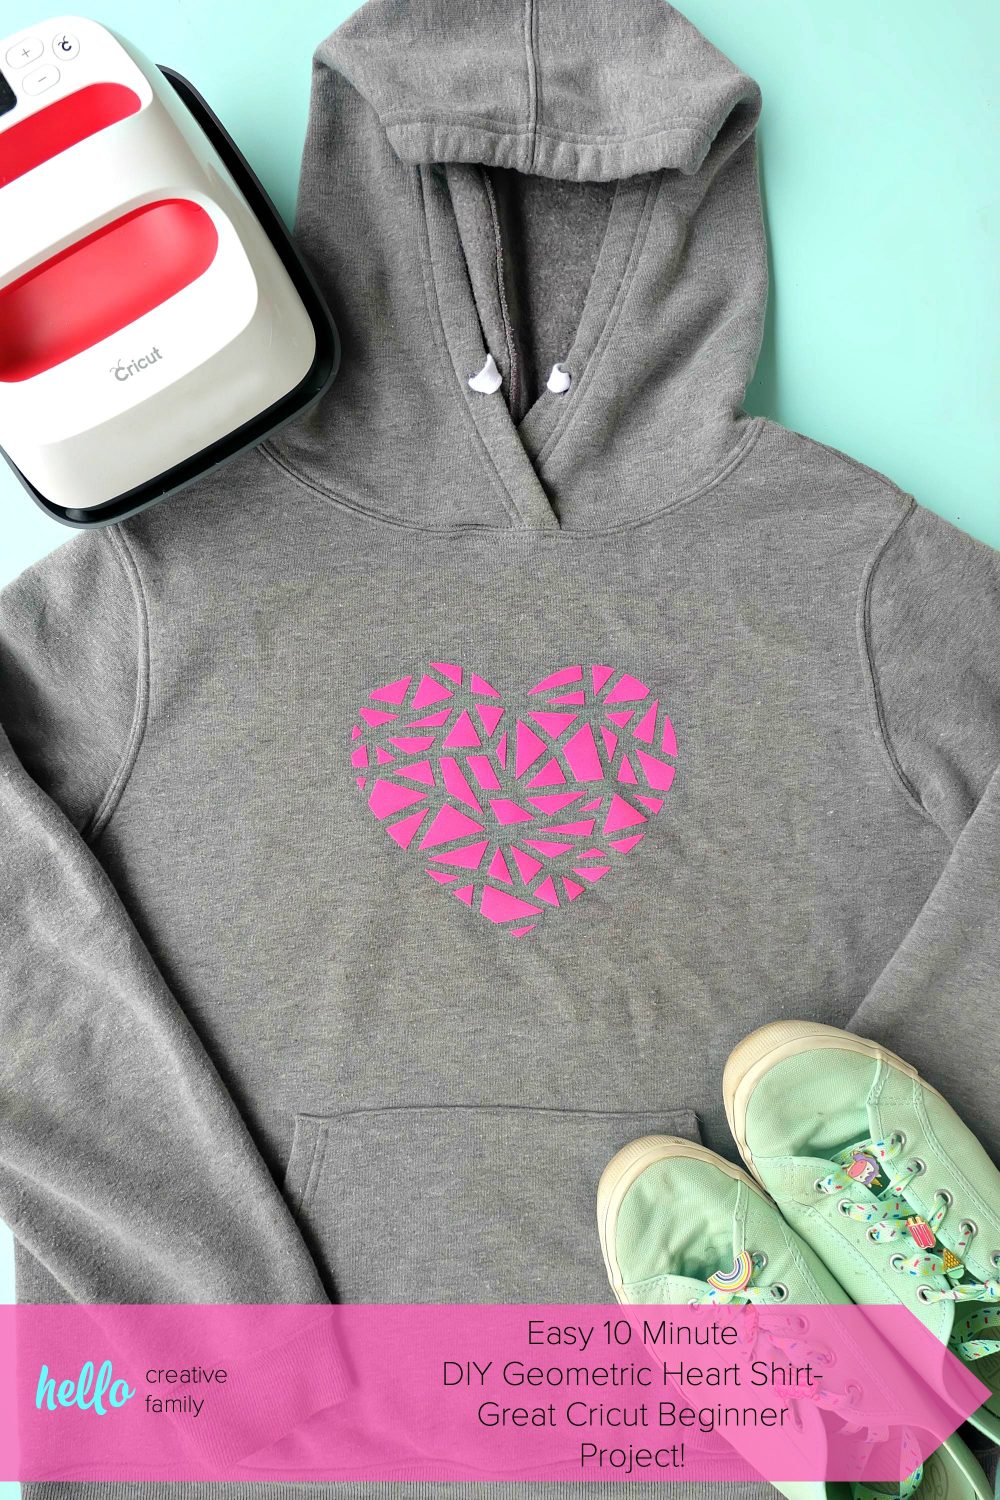 Looking for an easy Cricut beginner project? This 10 minute DIY geometric heart shirt is so cute and simple to make. A perfect first Cricut project or first htv project for those new to the Cricut world! #DIY #Cricut #CricutMade #handmade #geometricheart